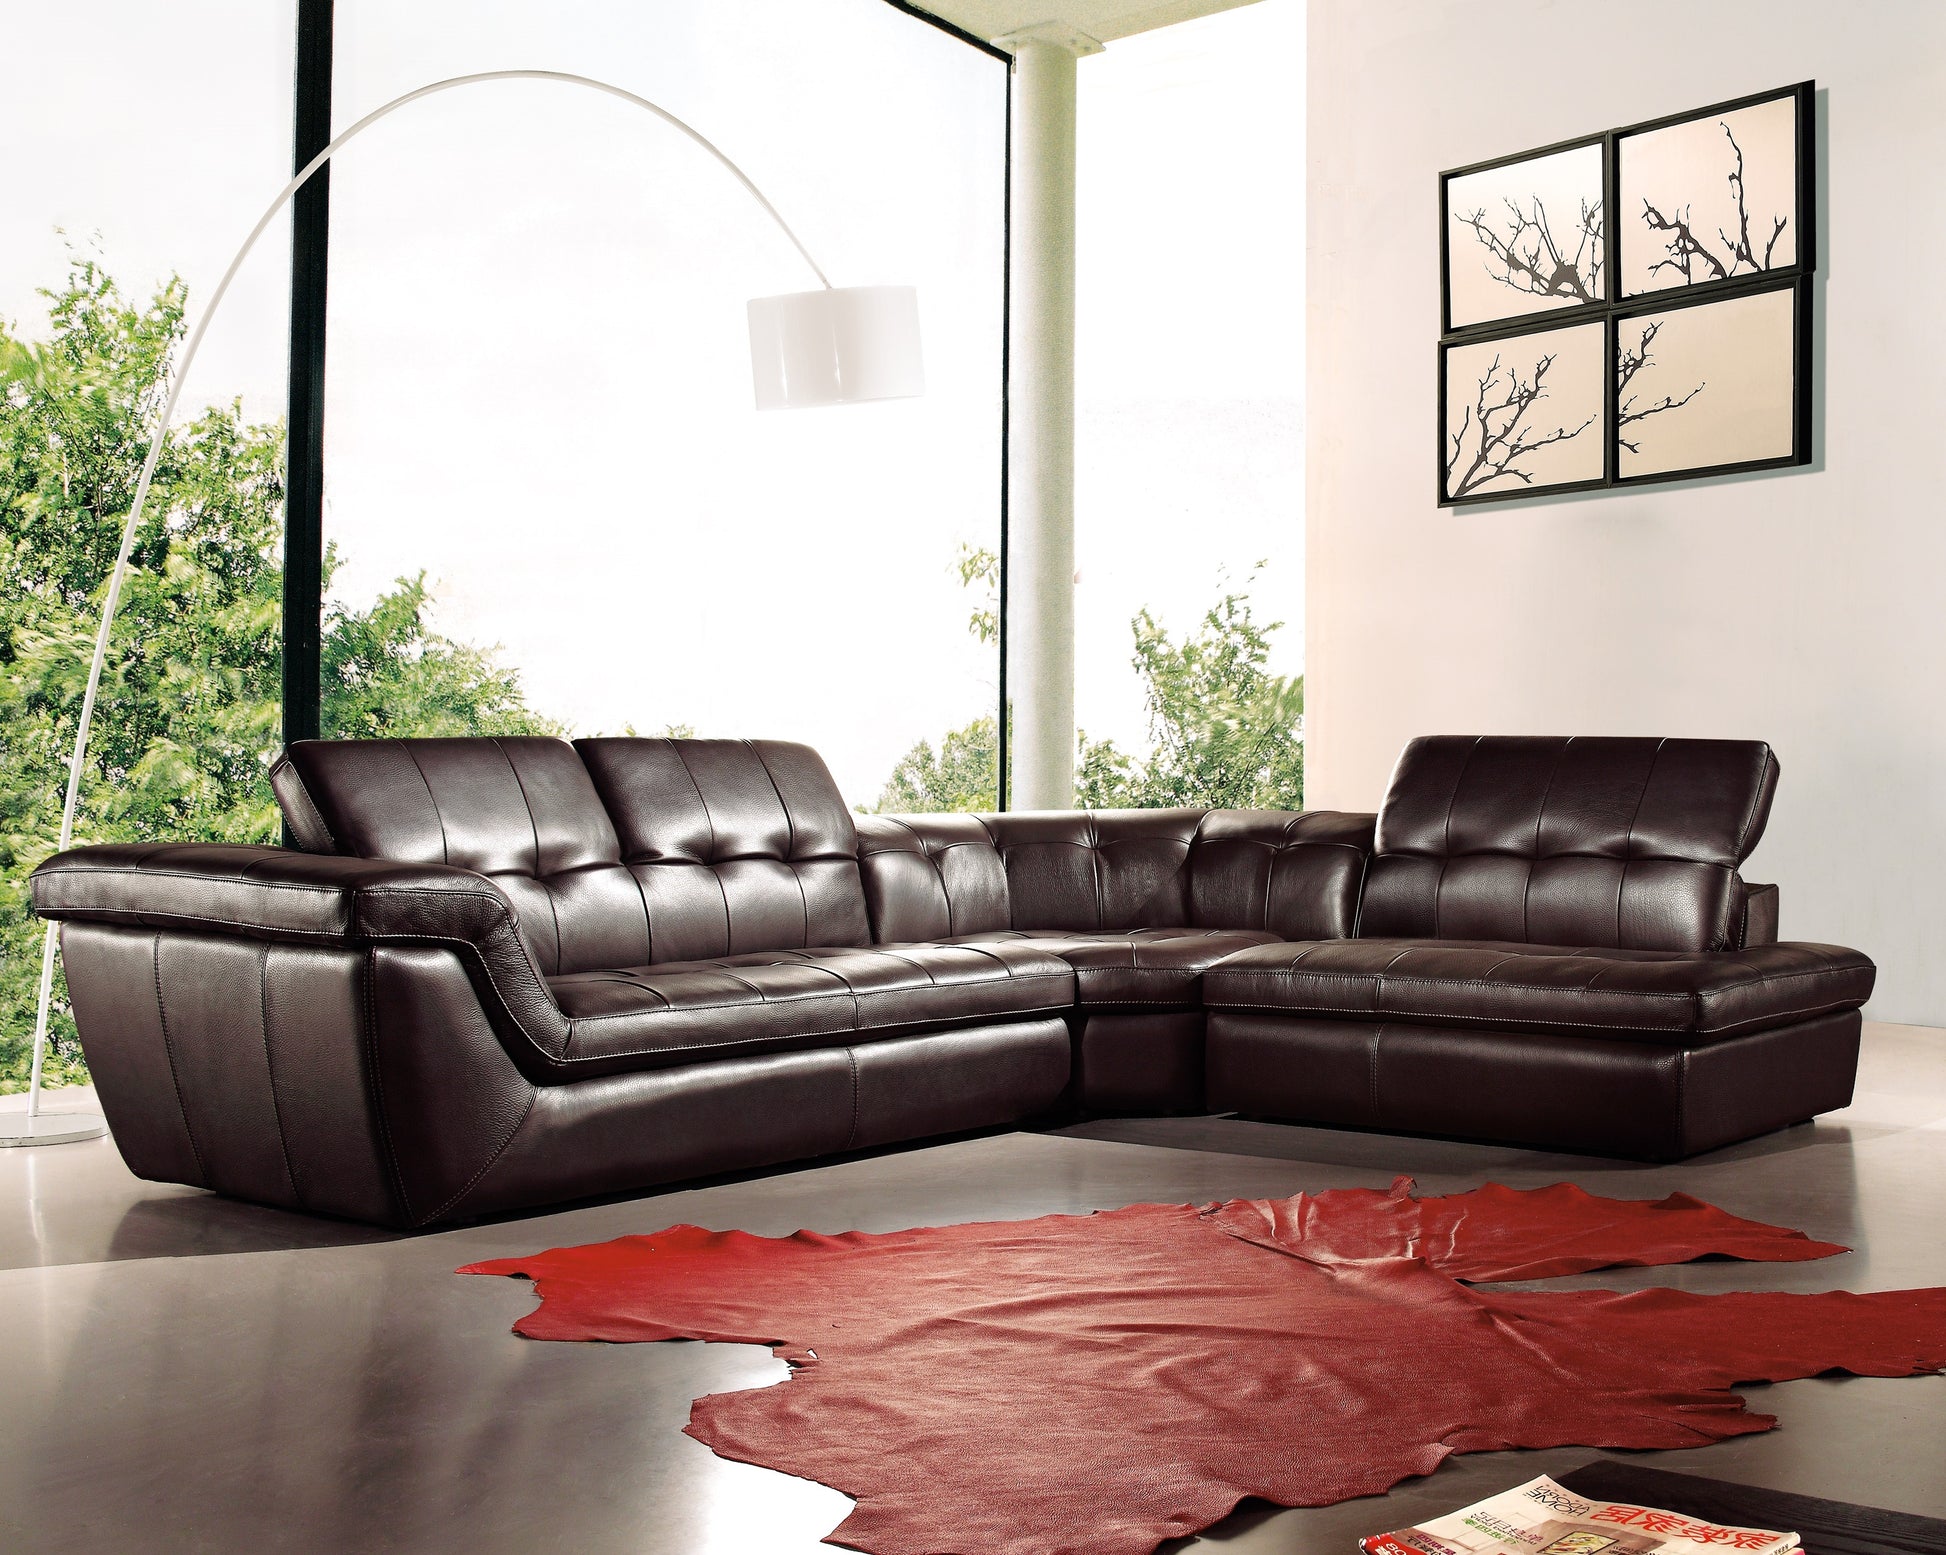 397 Italian Leather Sectional Sofa Chocolate Color RHF by JM